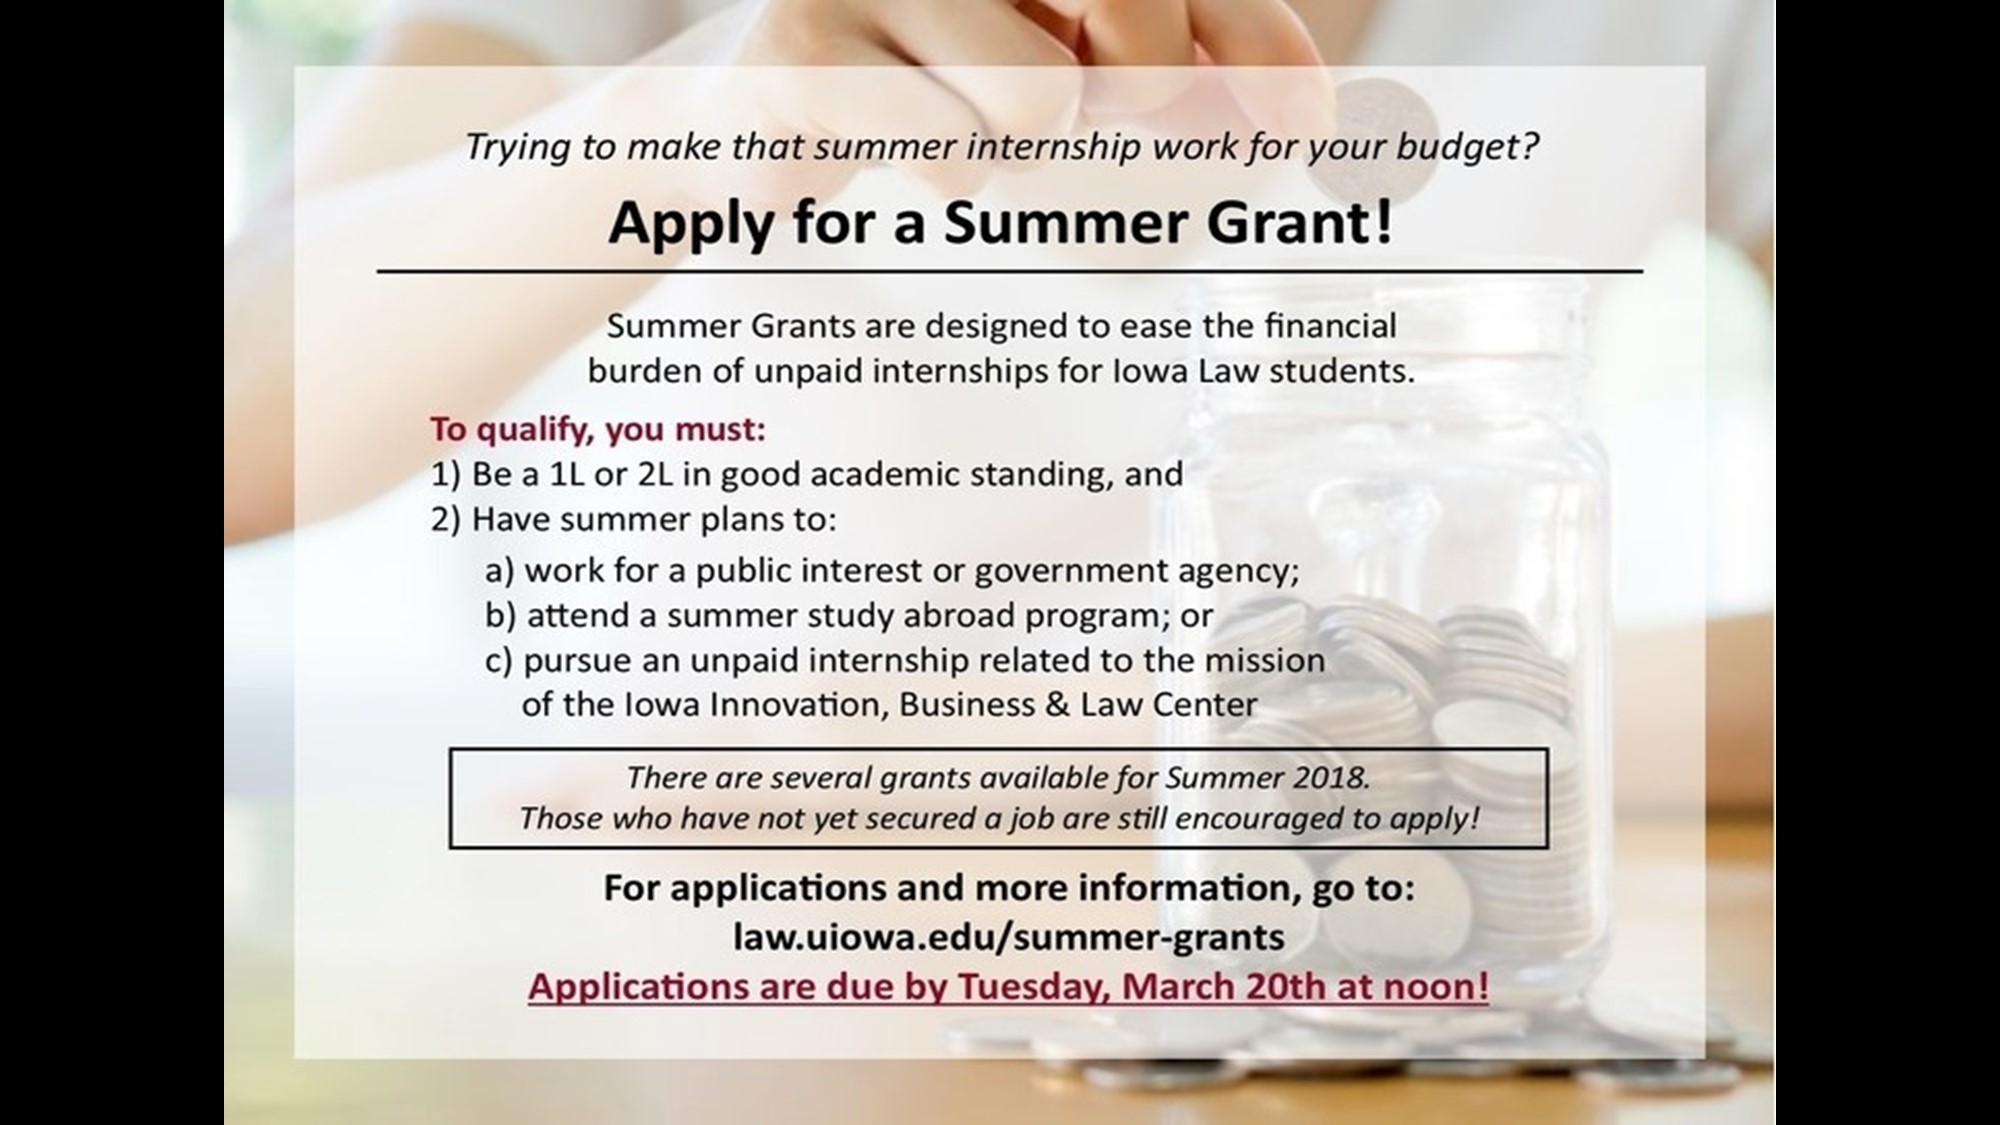 Apply for a Summer Grant!